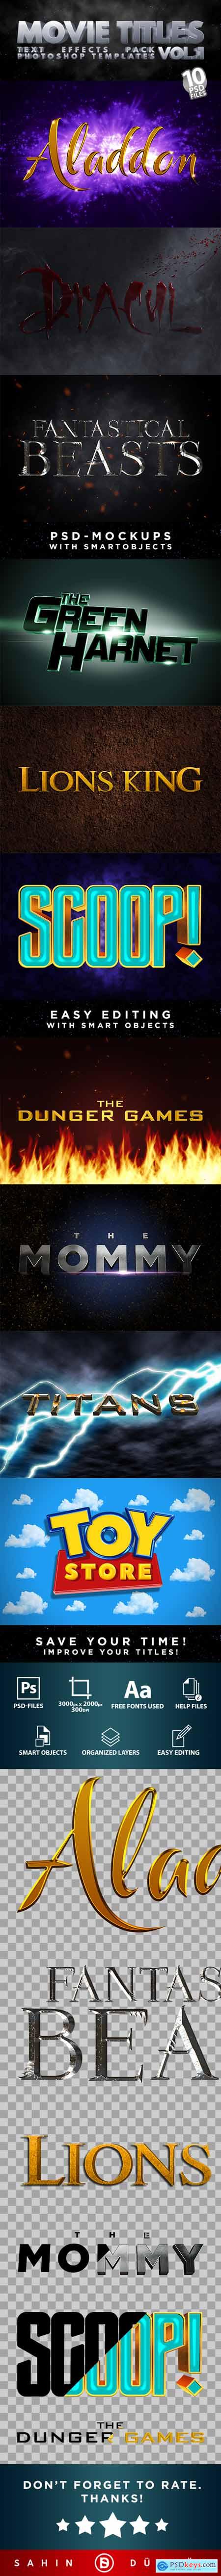 MOVIE TITLES - Vol.1 - Text-Effects-Mockups - Template-Pack 30111191